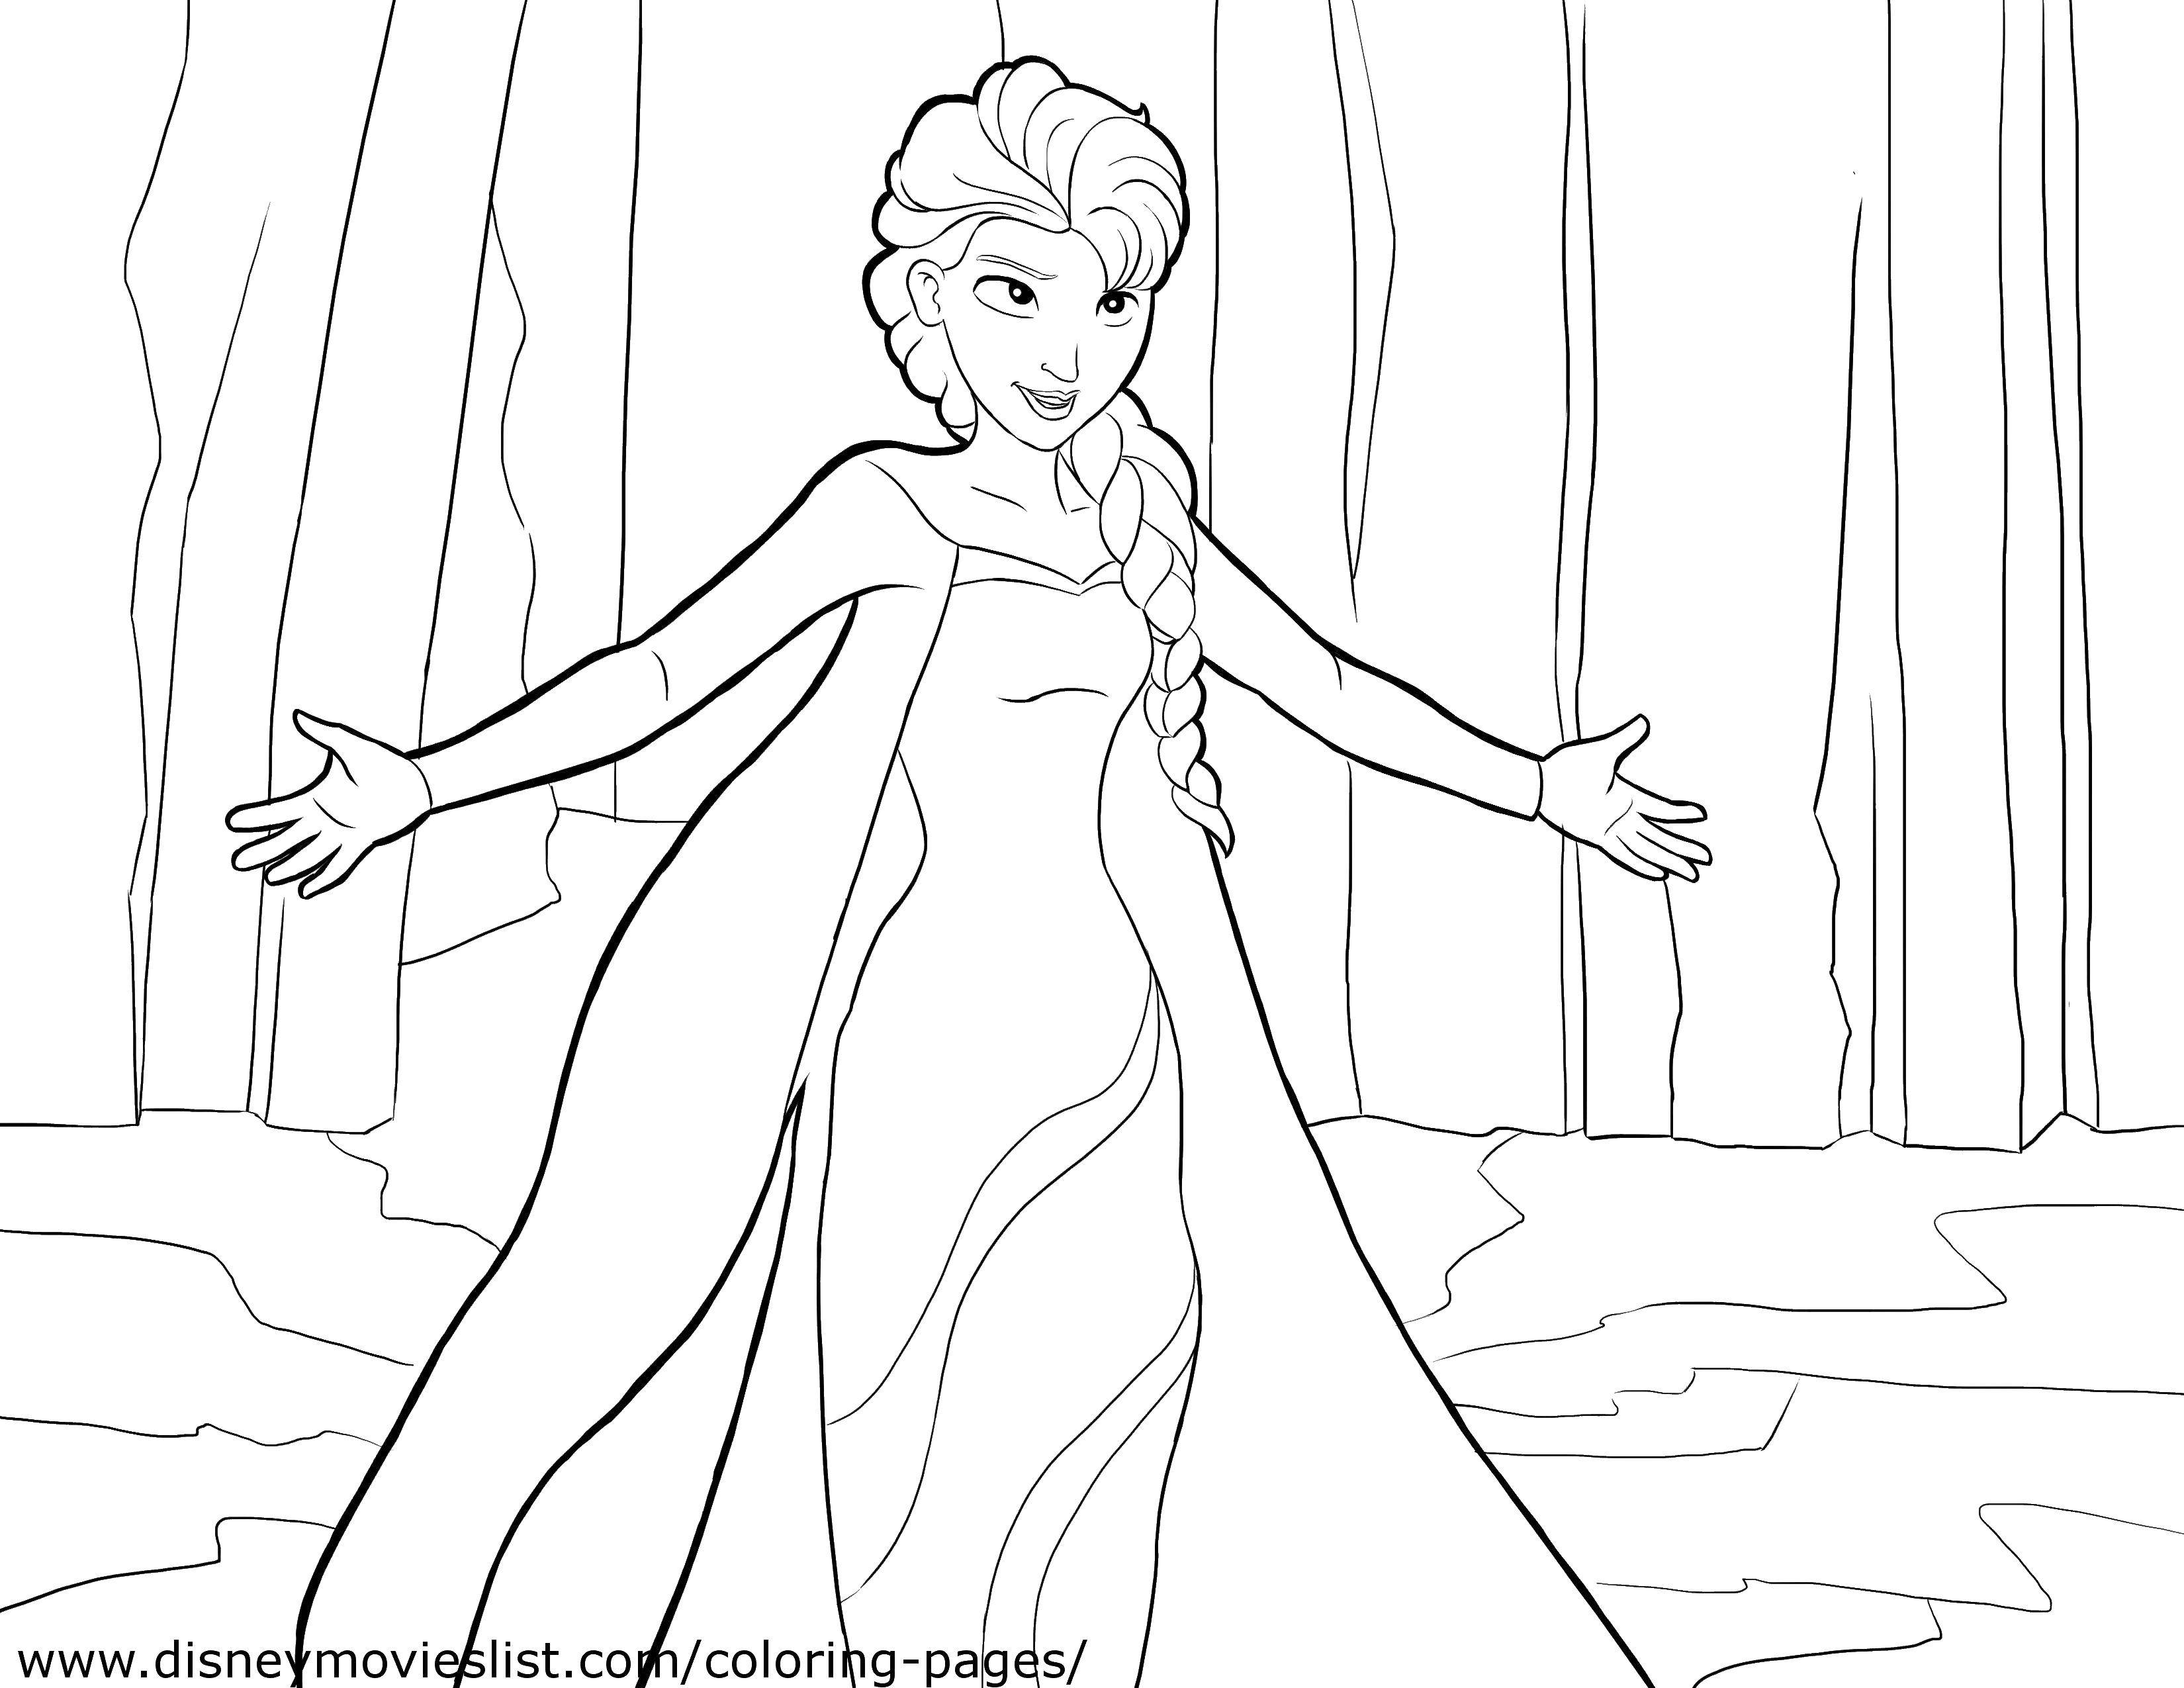 Coloring Elsa. Category The characters from fairy tales. Tags:  Elsa.